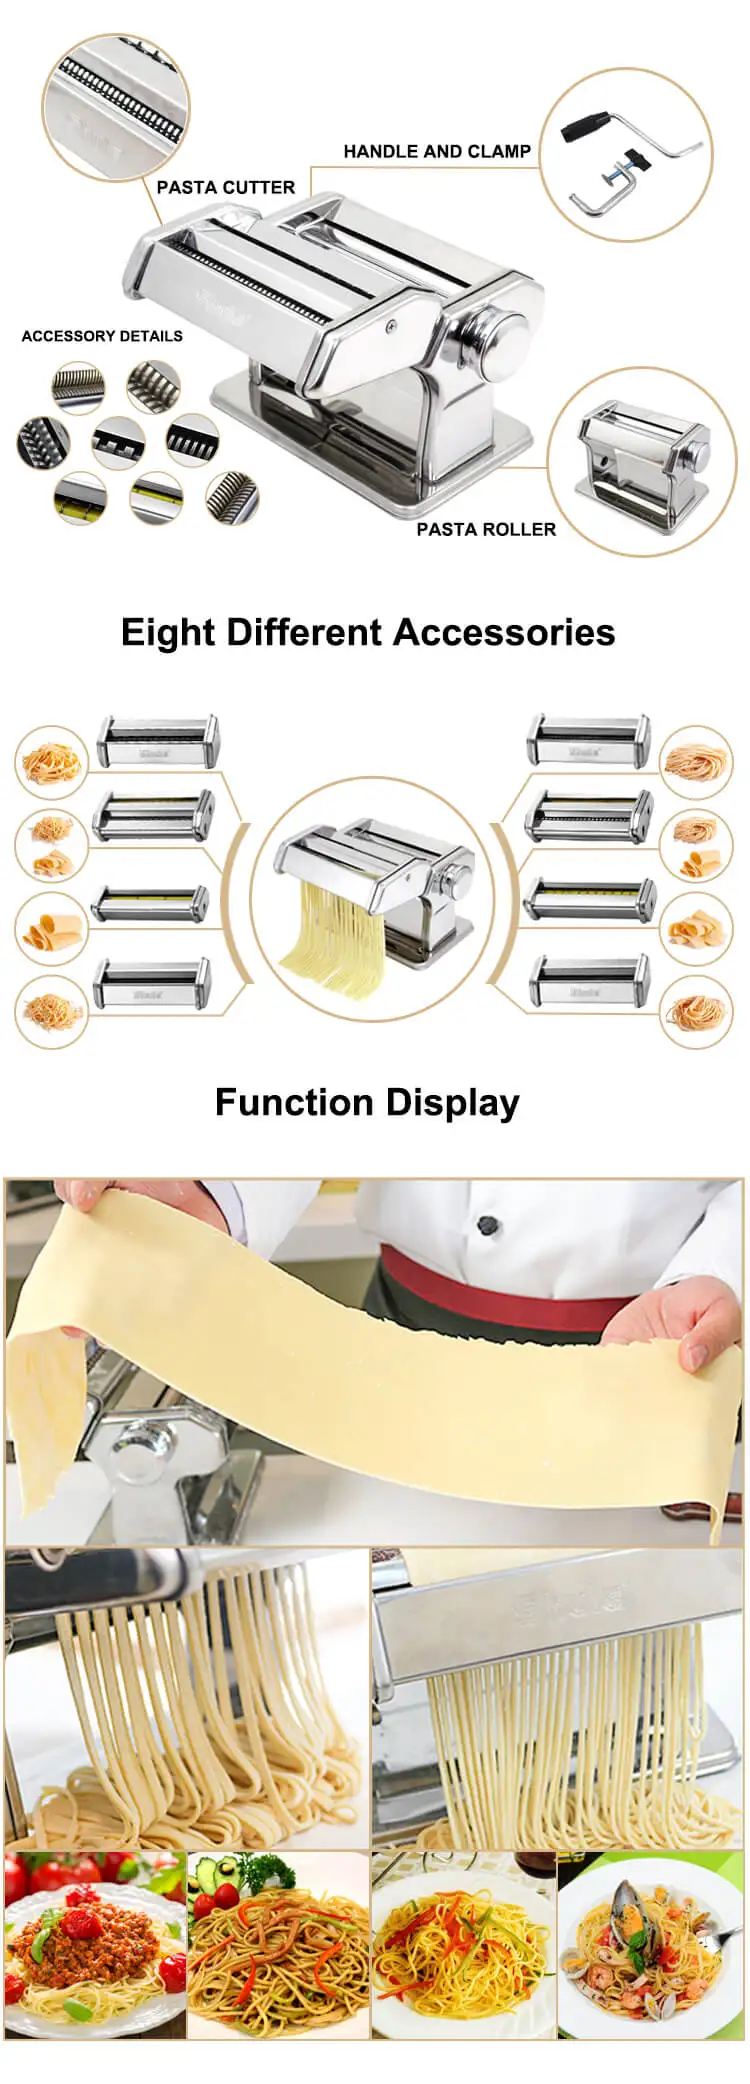 Home Use Stainless Steel Marcato Design Pasta Machine